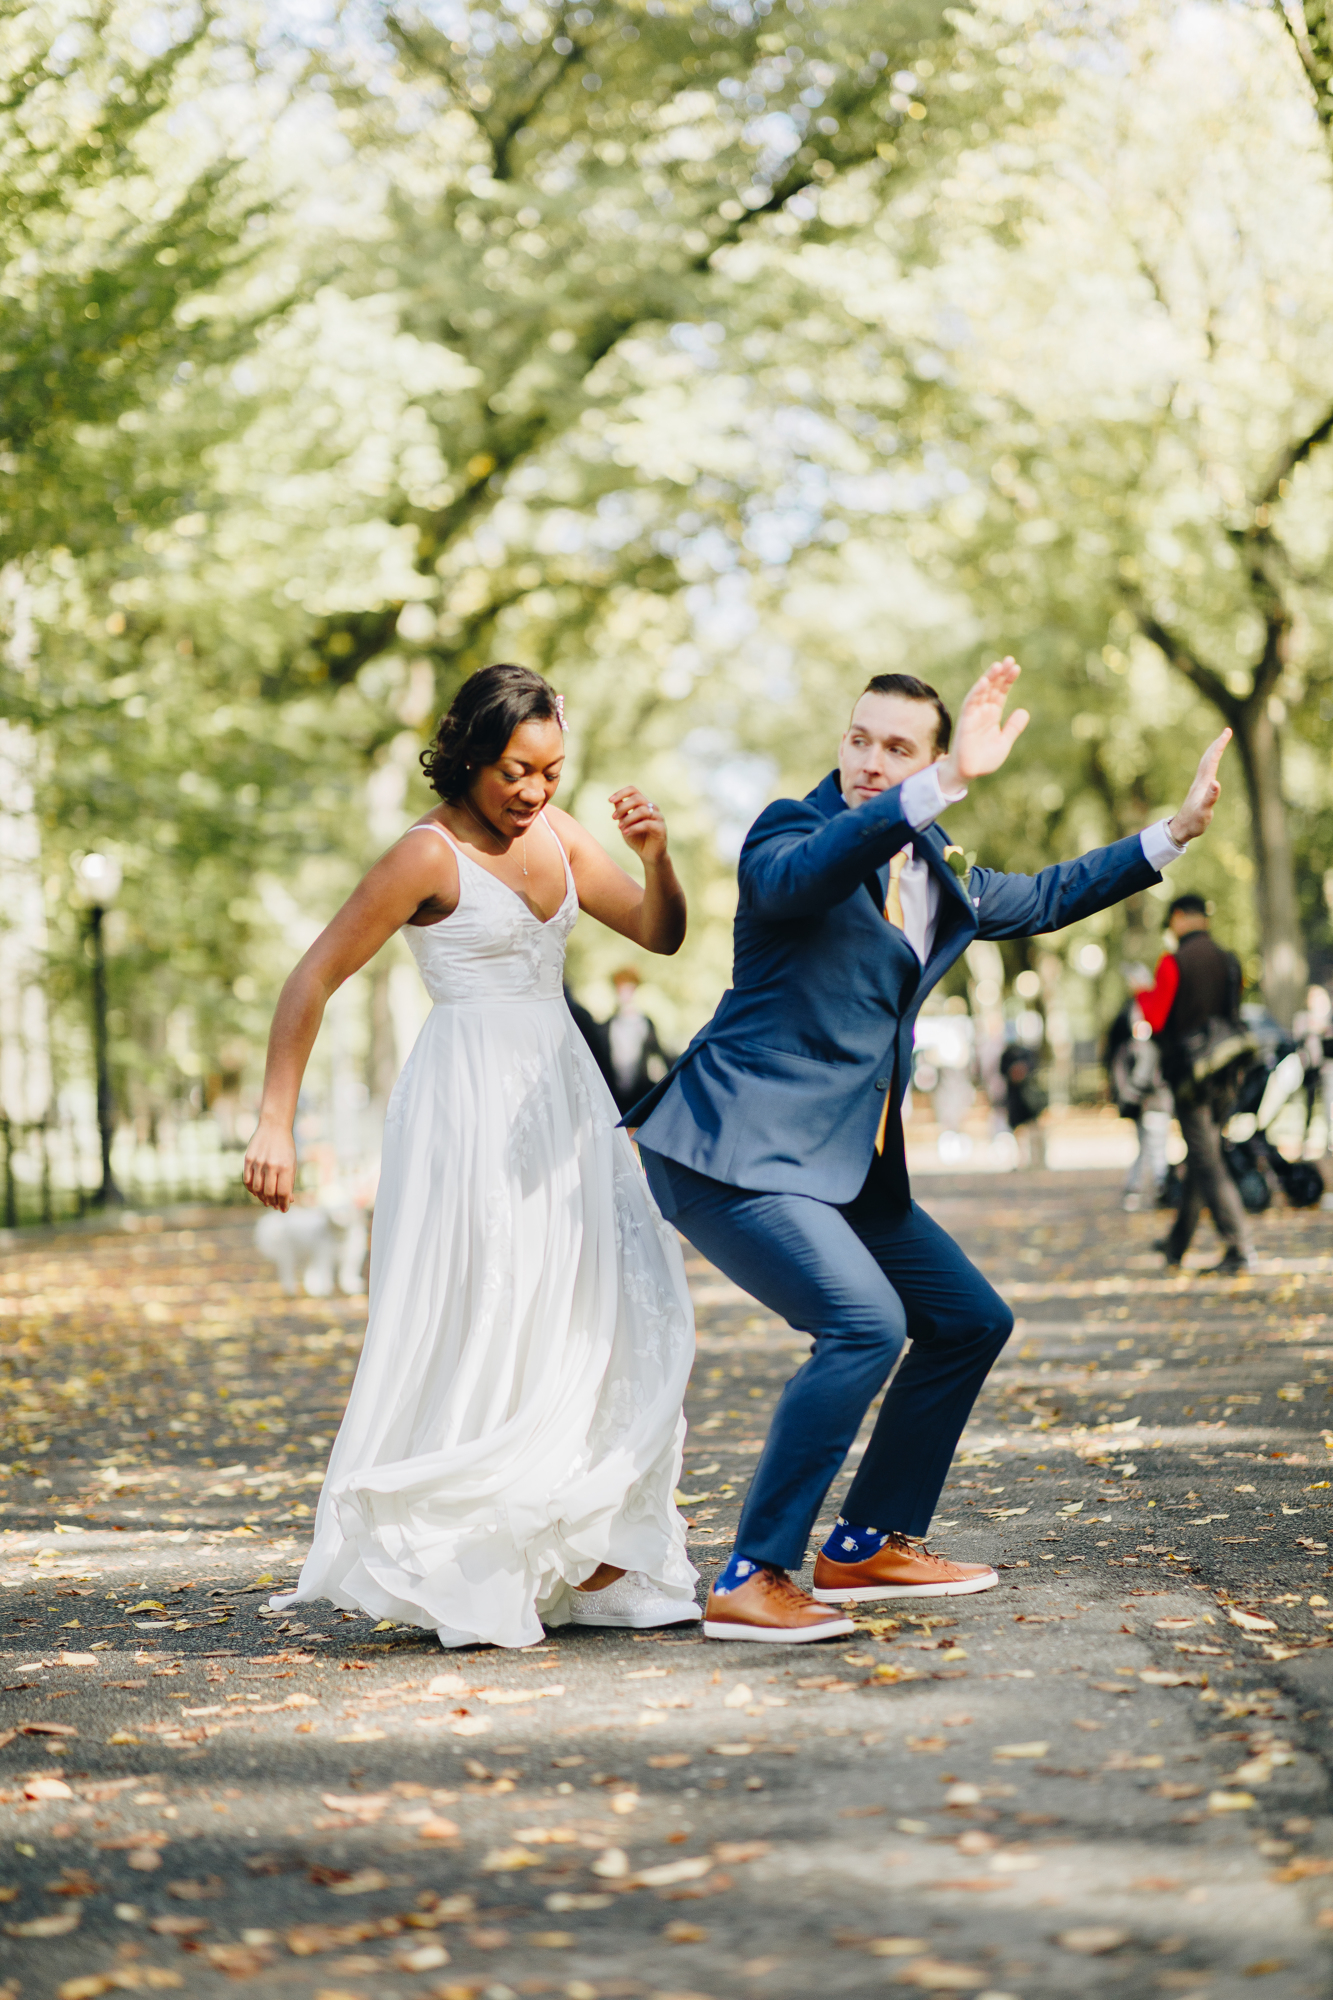 Autumn Central Park Elopement Photos in NYC